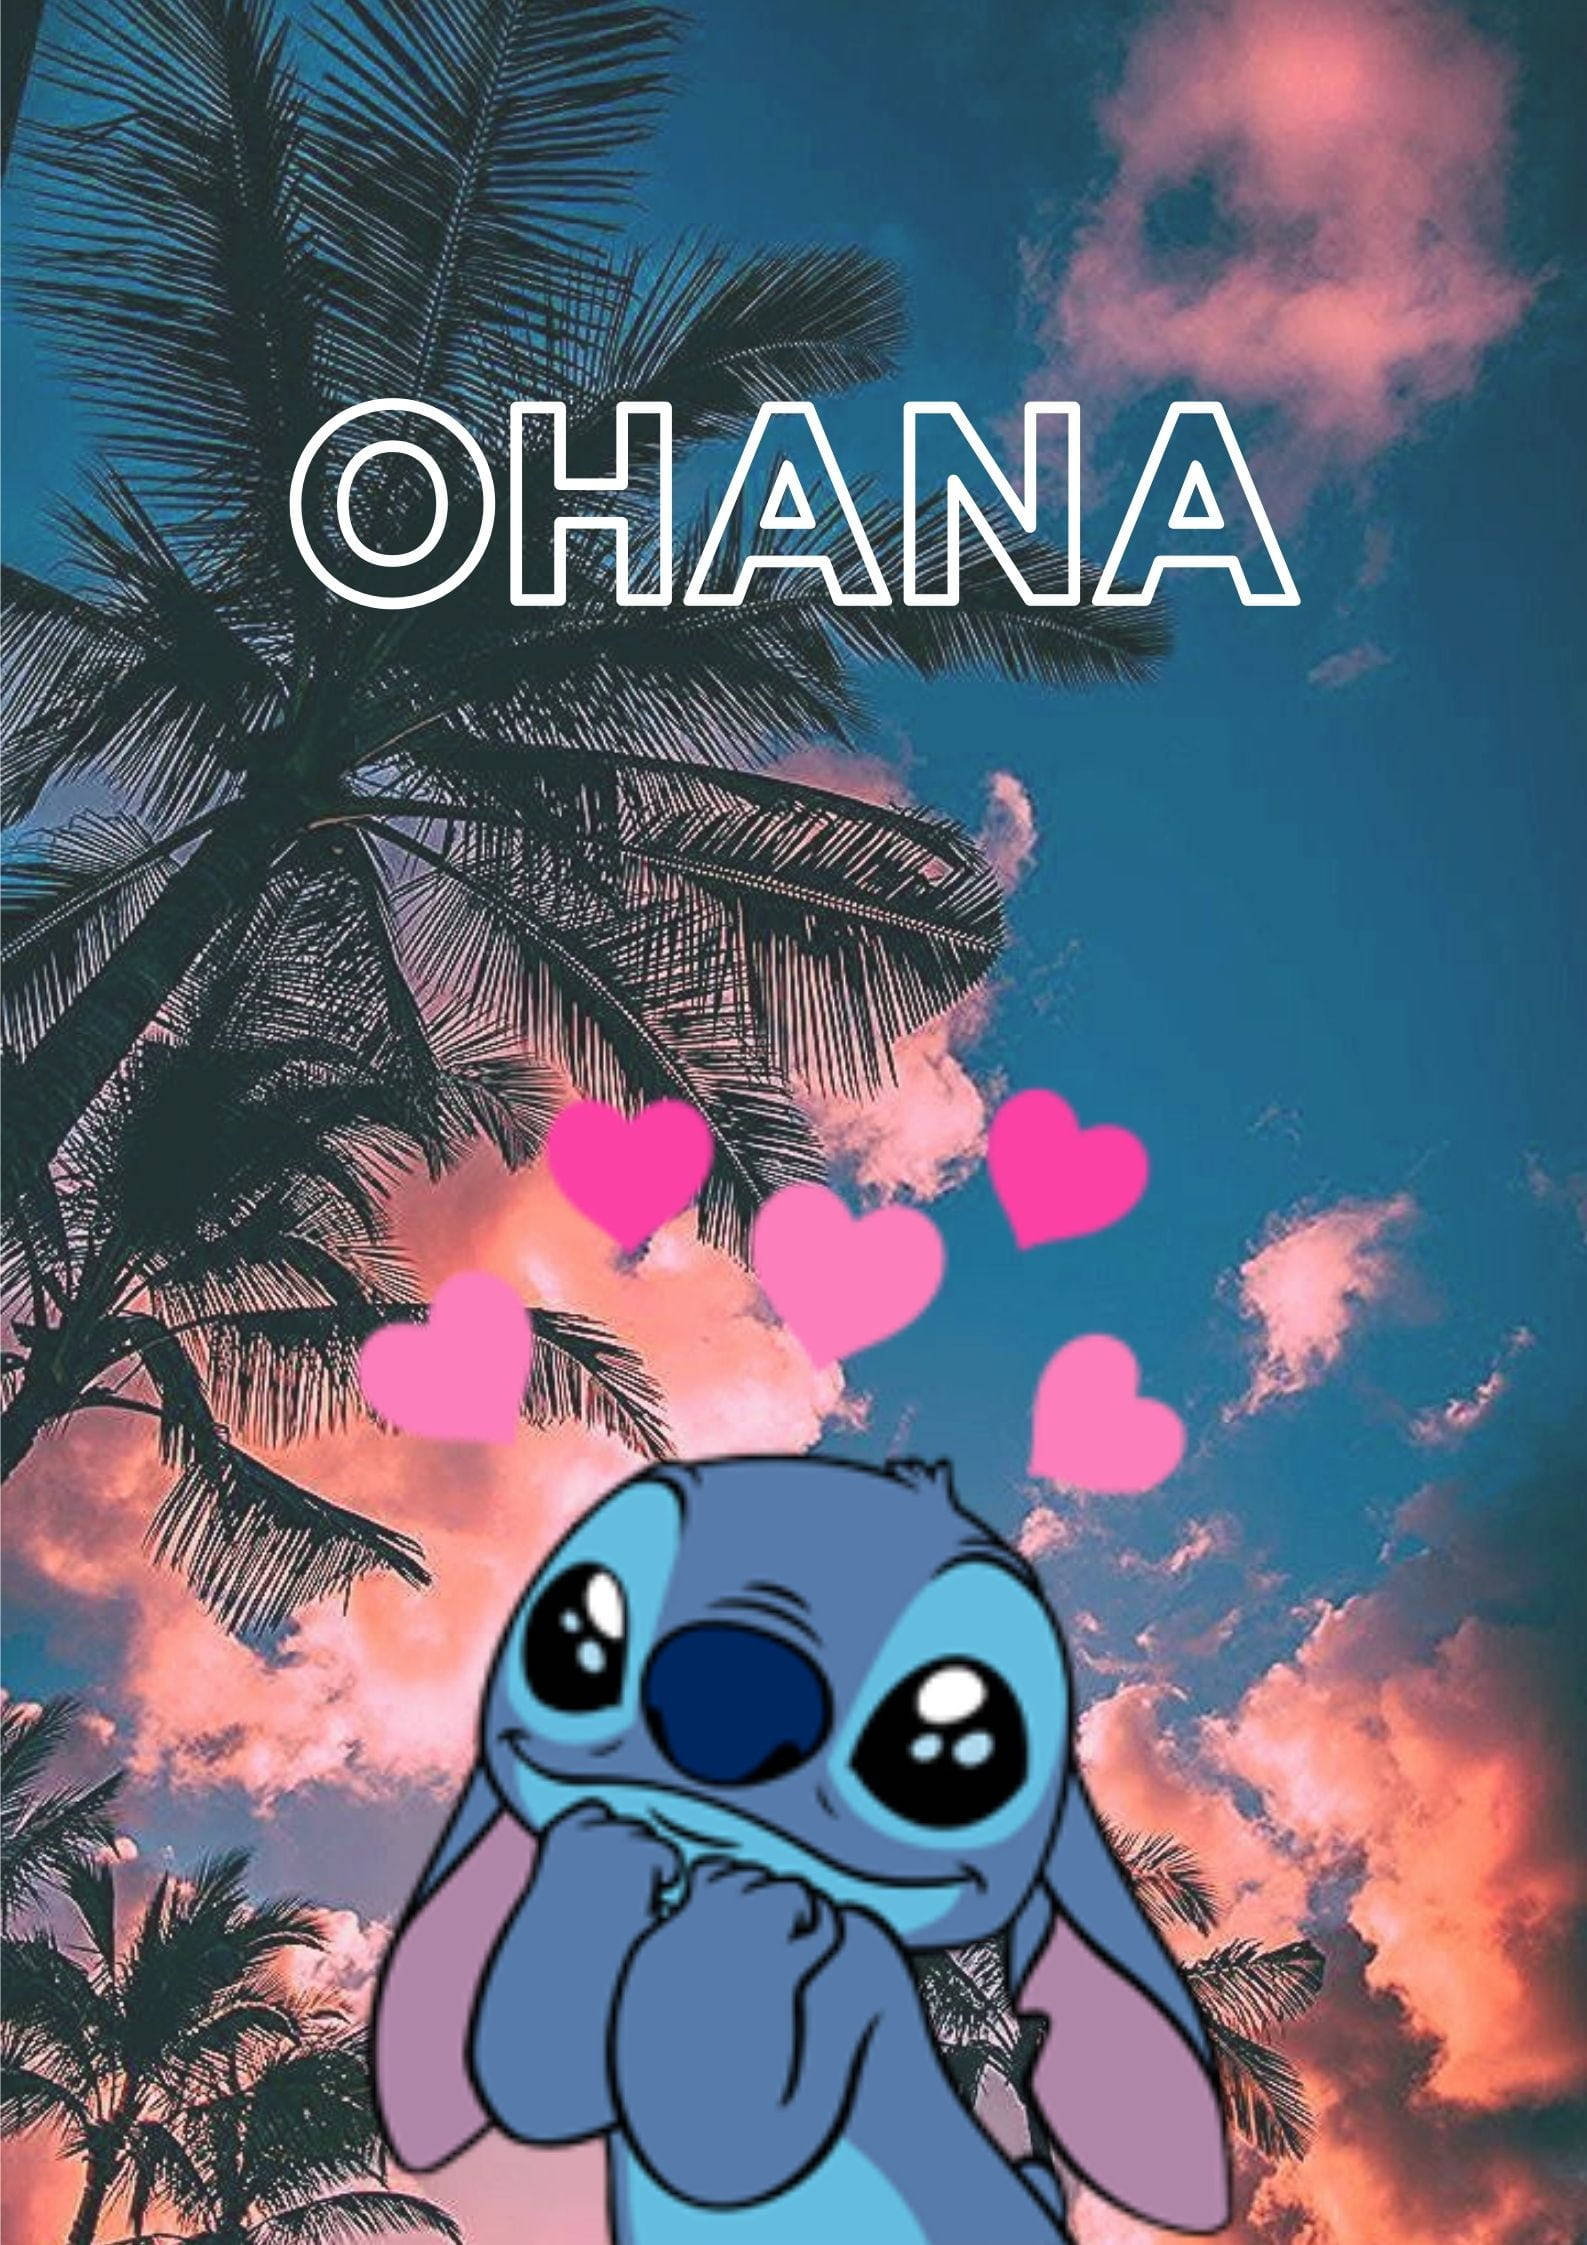 Download Aesthetic Lilo And Stitch Ohana Wallpaper